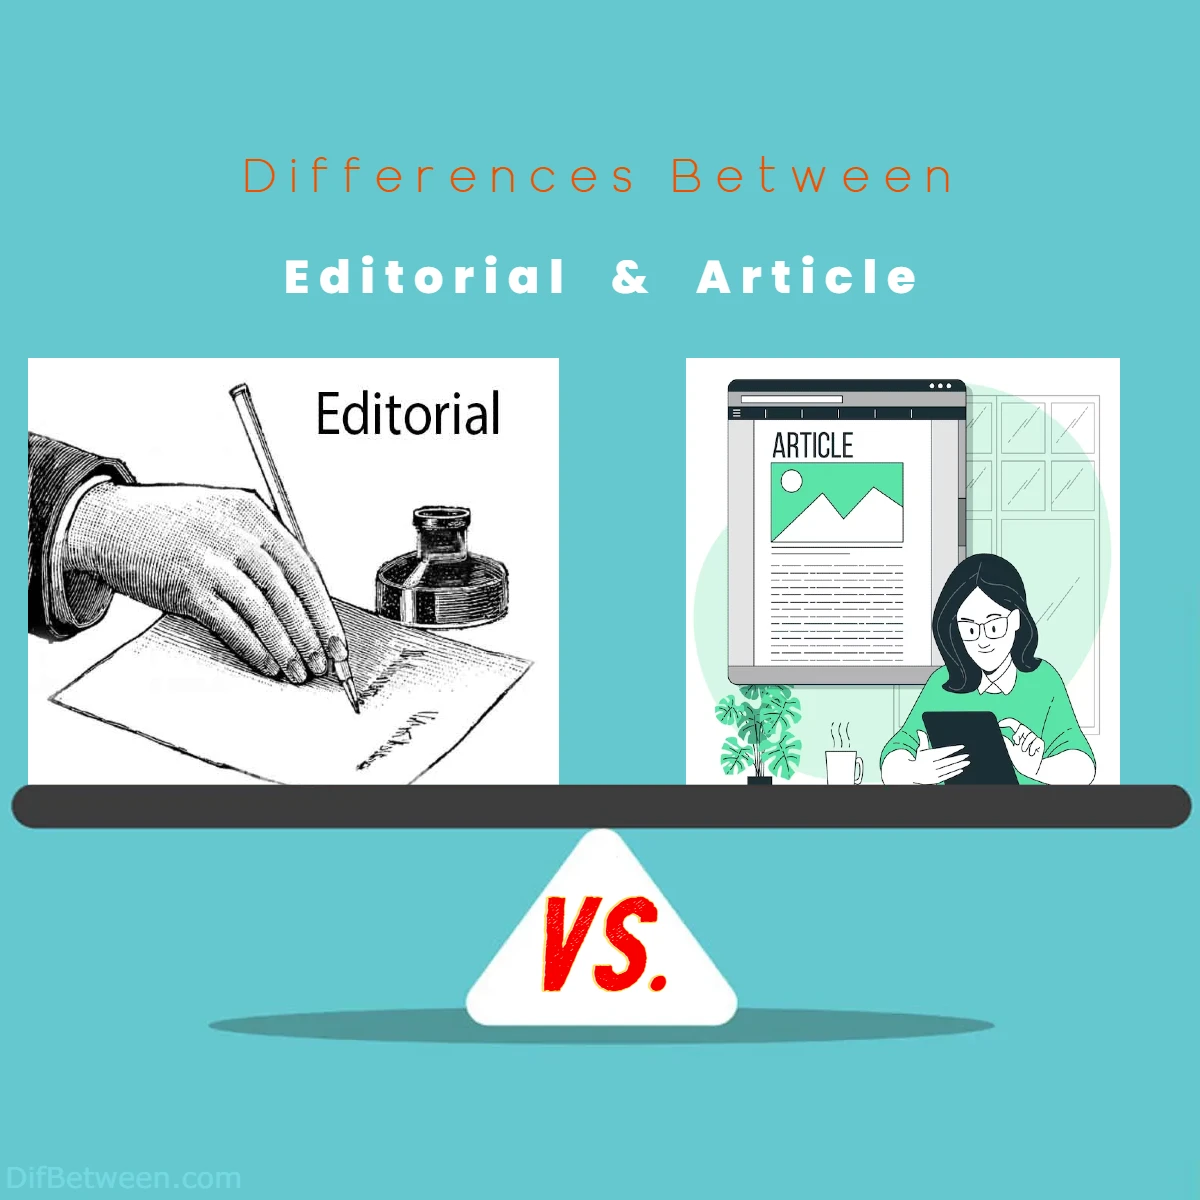 Differences Between Editorial vs Article